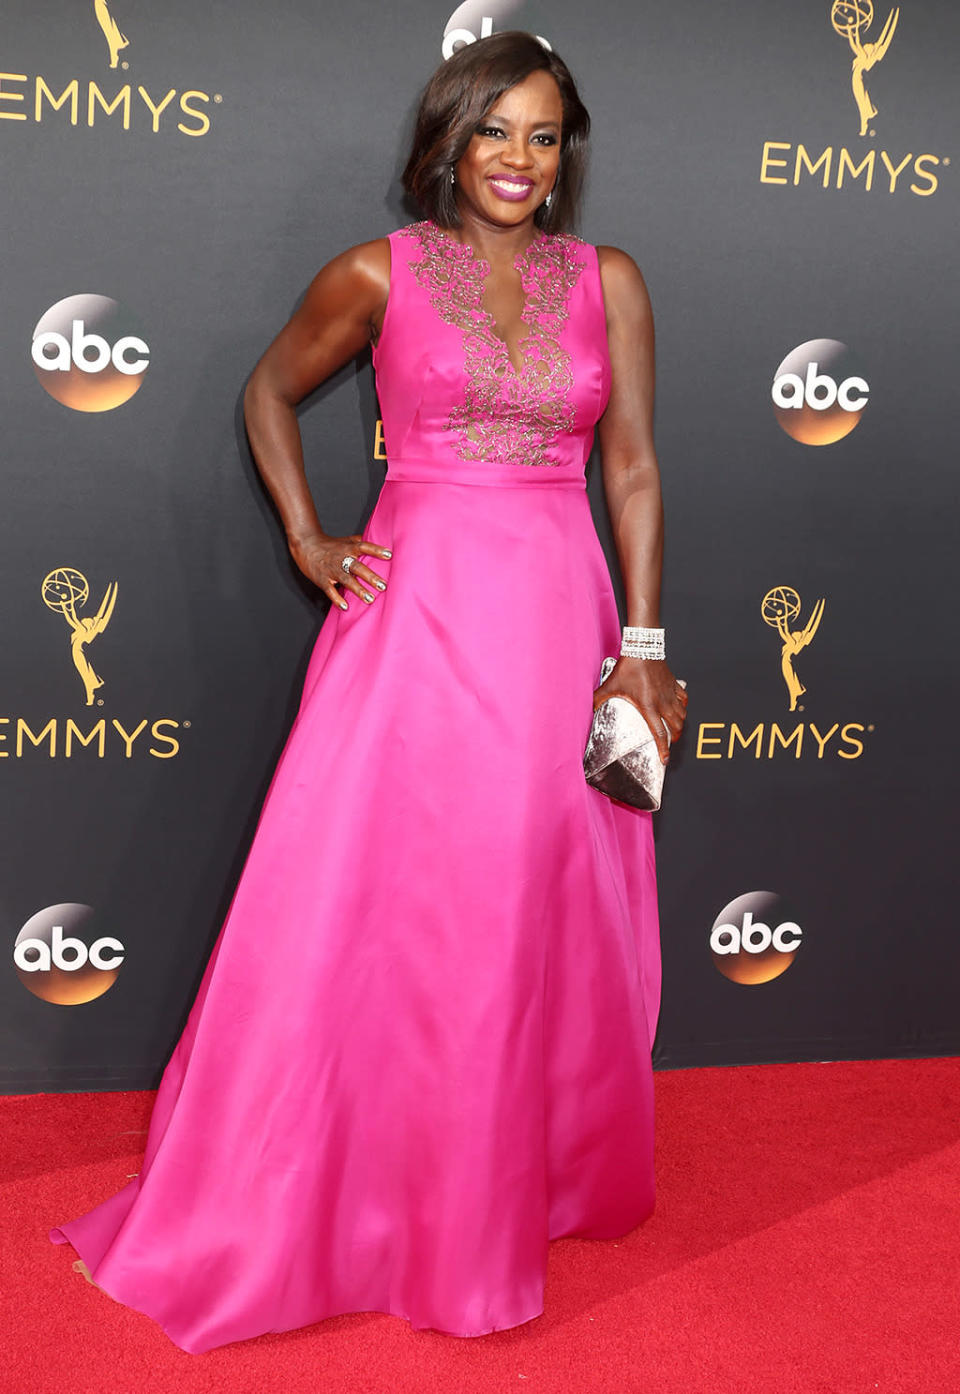 <p>Viola Davis arrives at the 68th Emmy Awards at the Microsoft Theater on September 18, 2016 in Los Angeles, Calif. (Photo by Getty Images)</p>